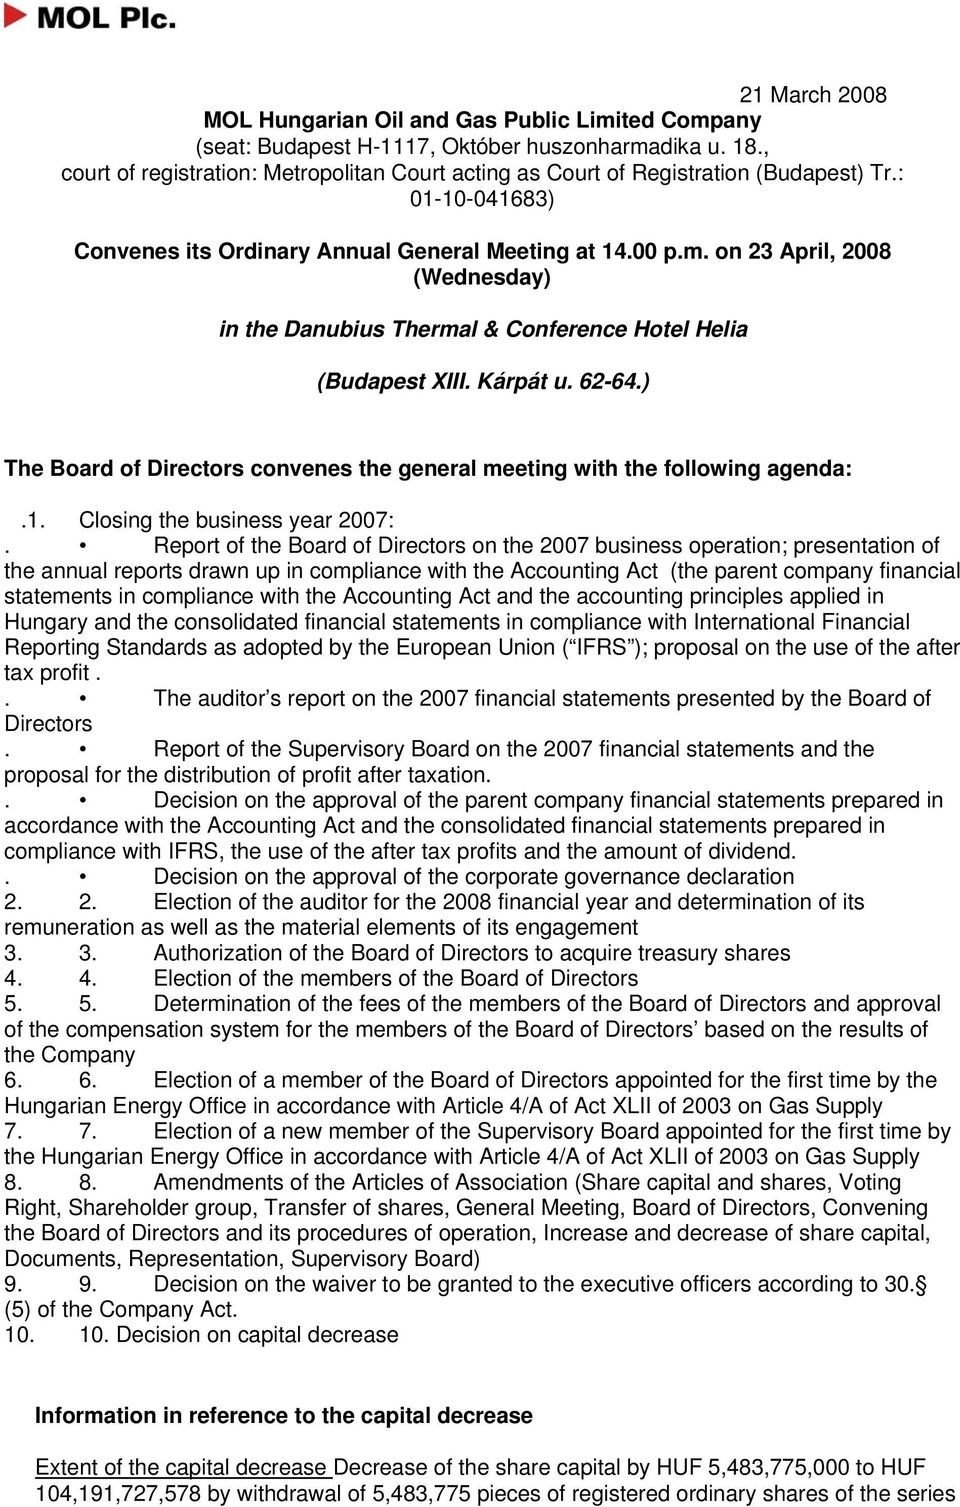 on 23 April, 2008 (Wednesday) in the Danubius Thermal & Conference Hotel Helia (Budapest XIII. Kárpát u. 62-64.) The Board of Directors convenes the general meeting with the following agenda:.1.